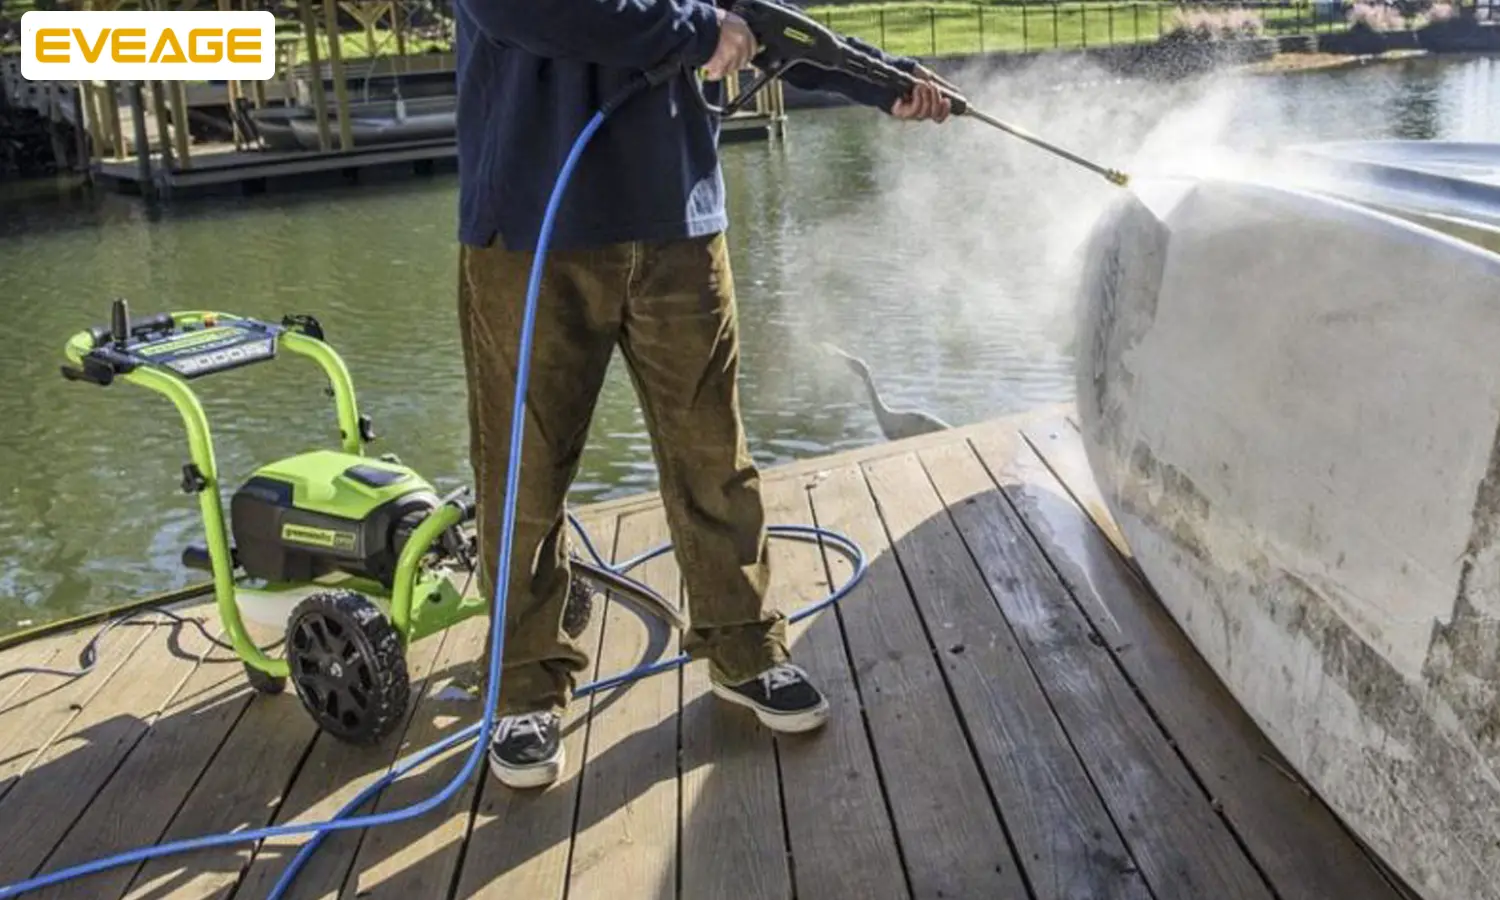 How long can you continuously run a pressure washer